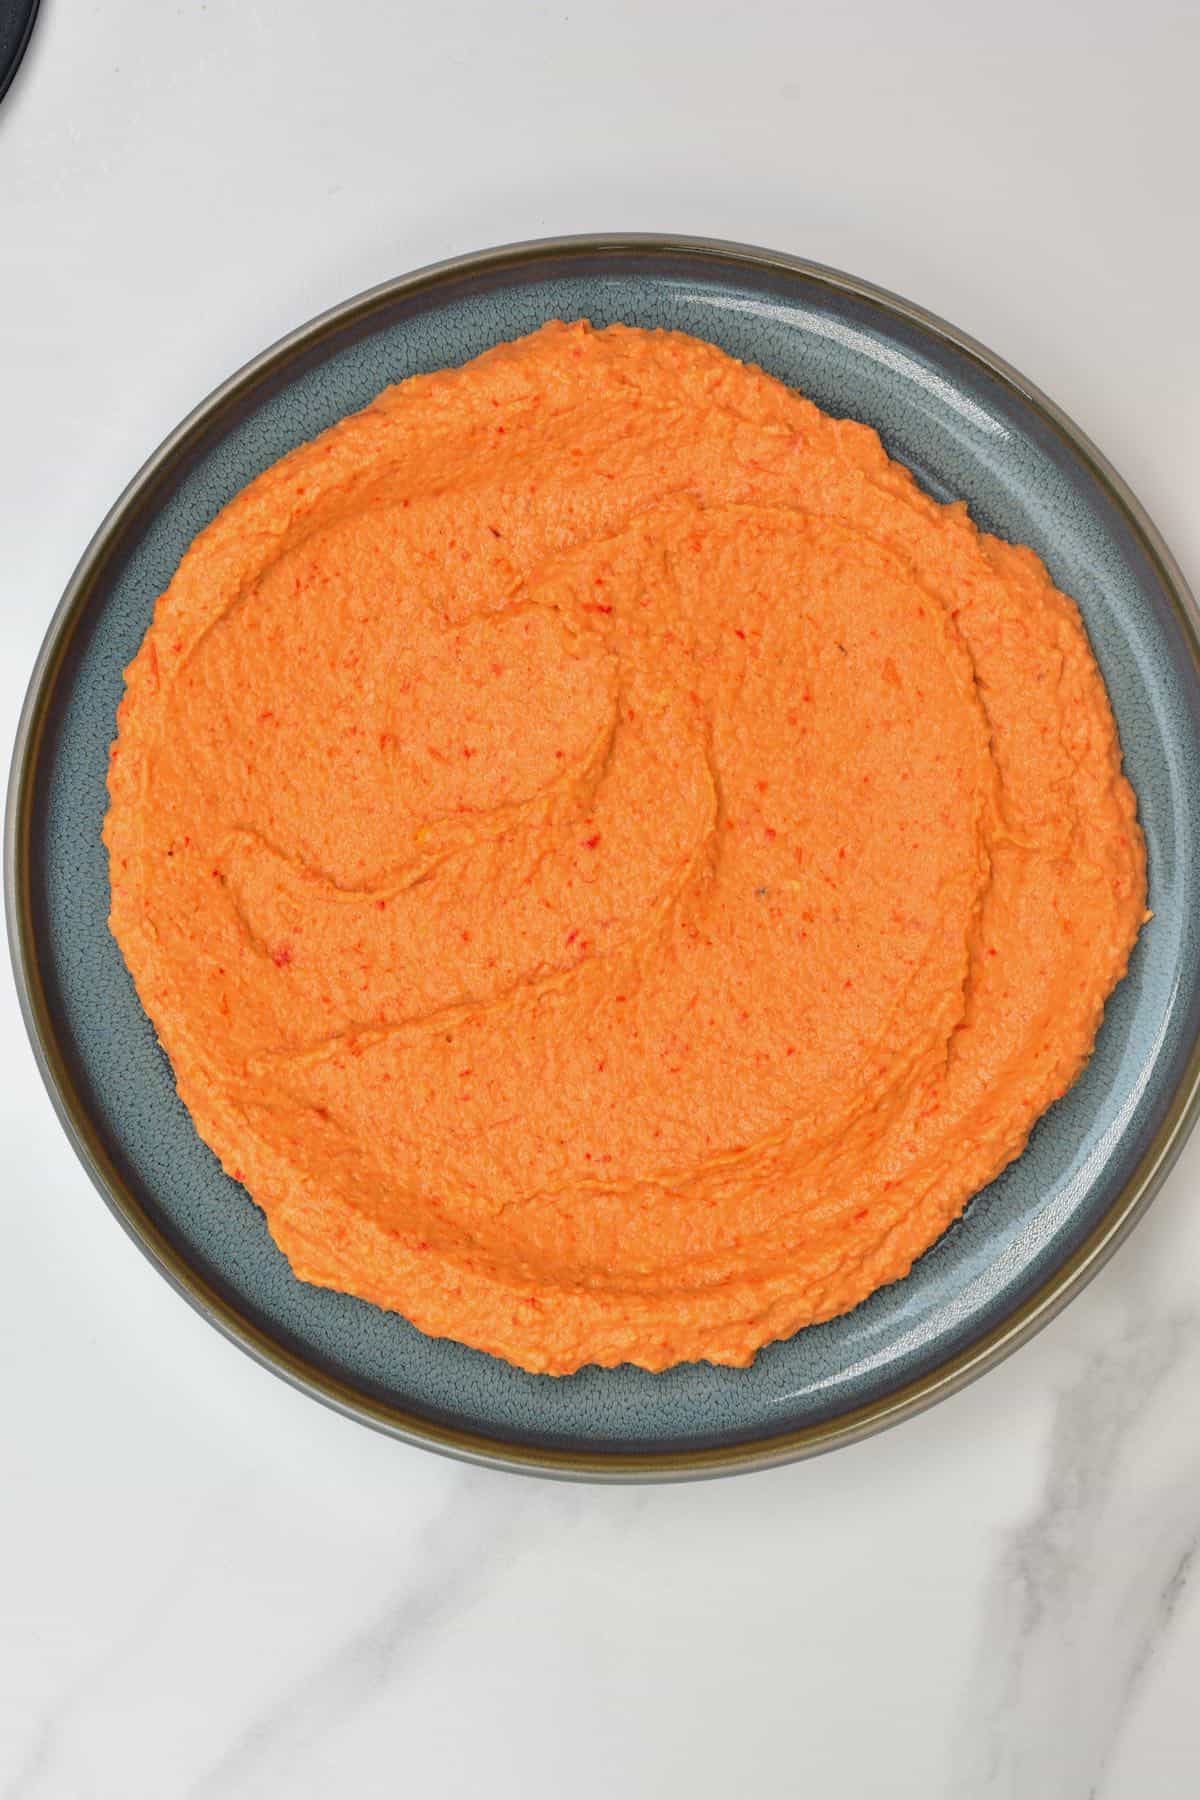 Roasted red pepper hummus in a plate